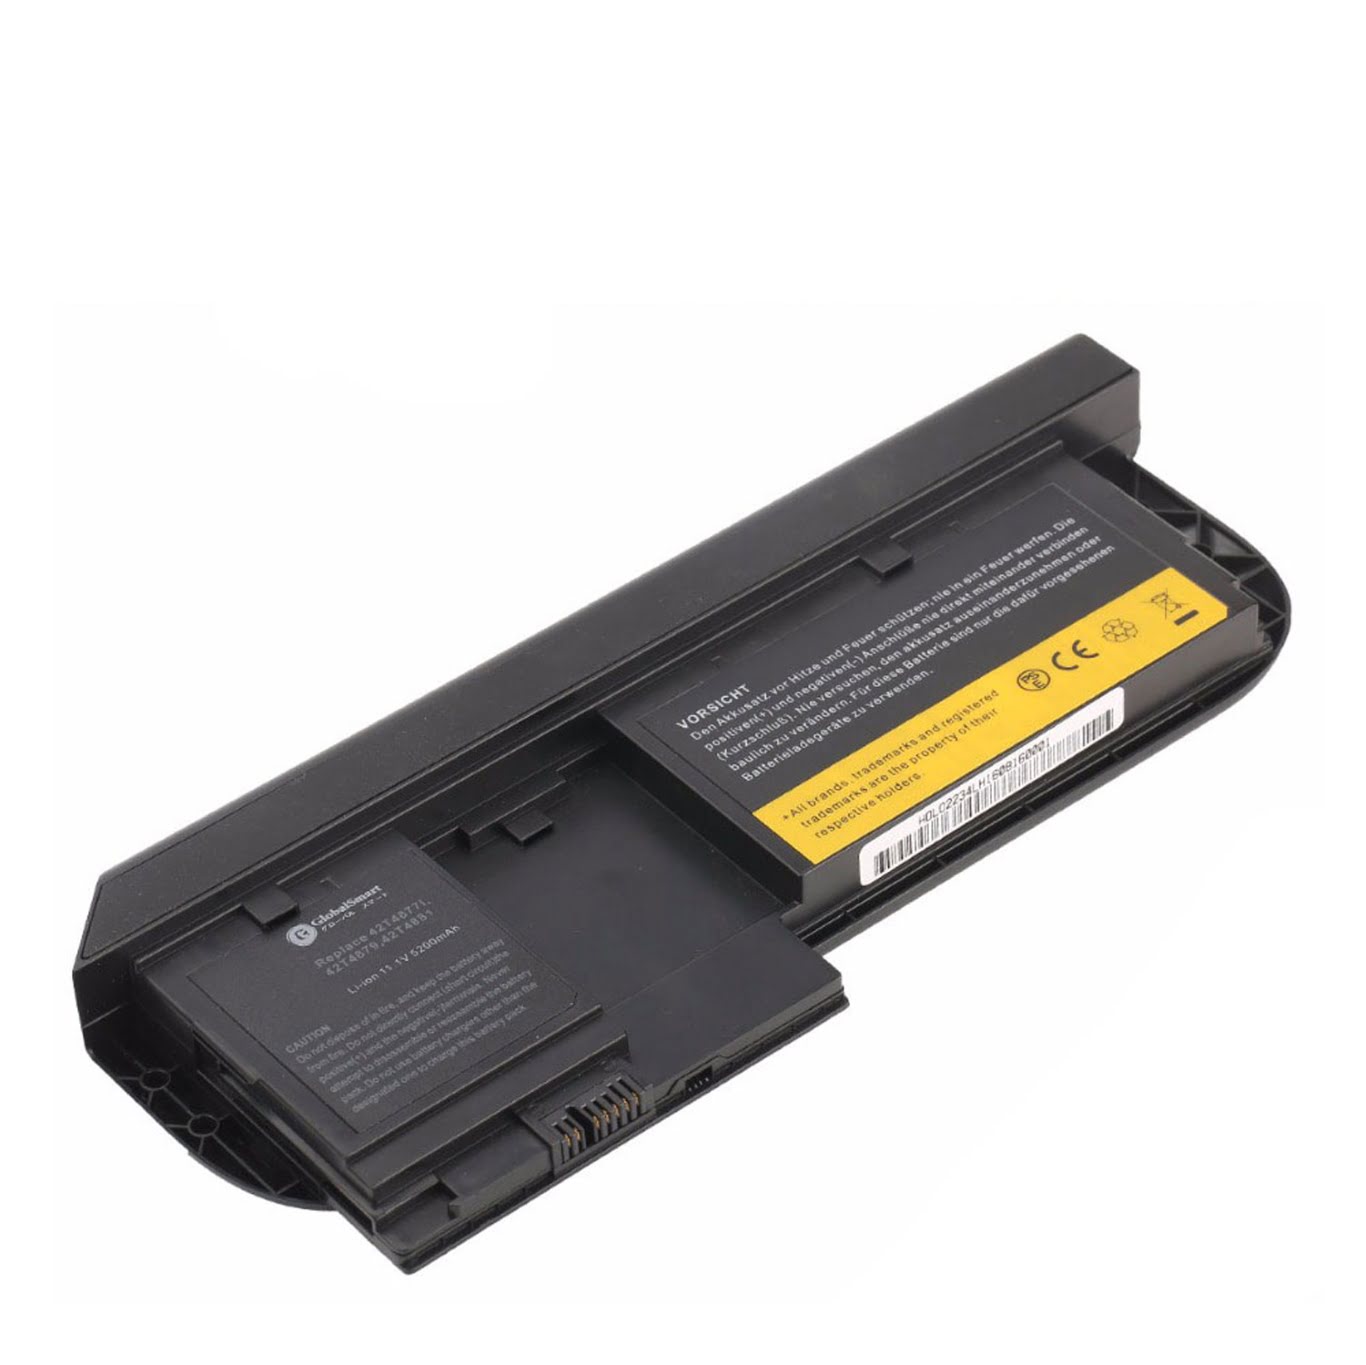 0A36285, 0A36286 replacement Laptop Battery for Lenovo ThinkPad X220 Tablet, ThinkPad X220i Tablet, 4400mAh, 11.1V